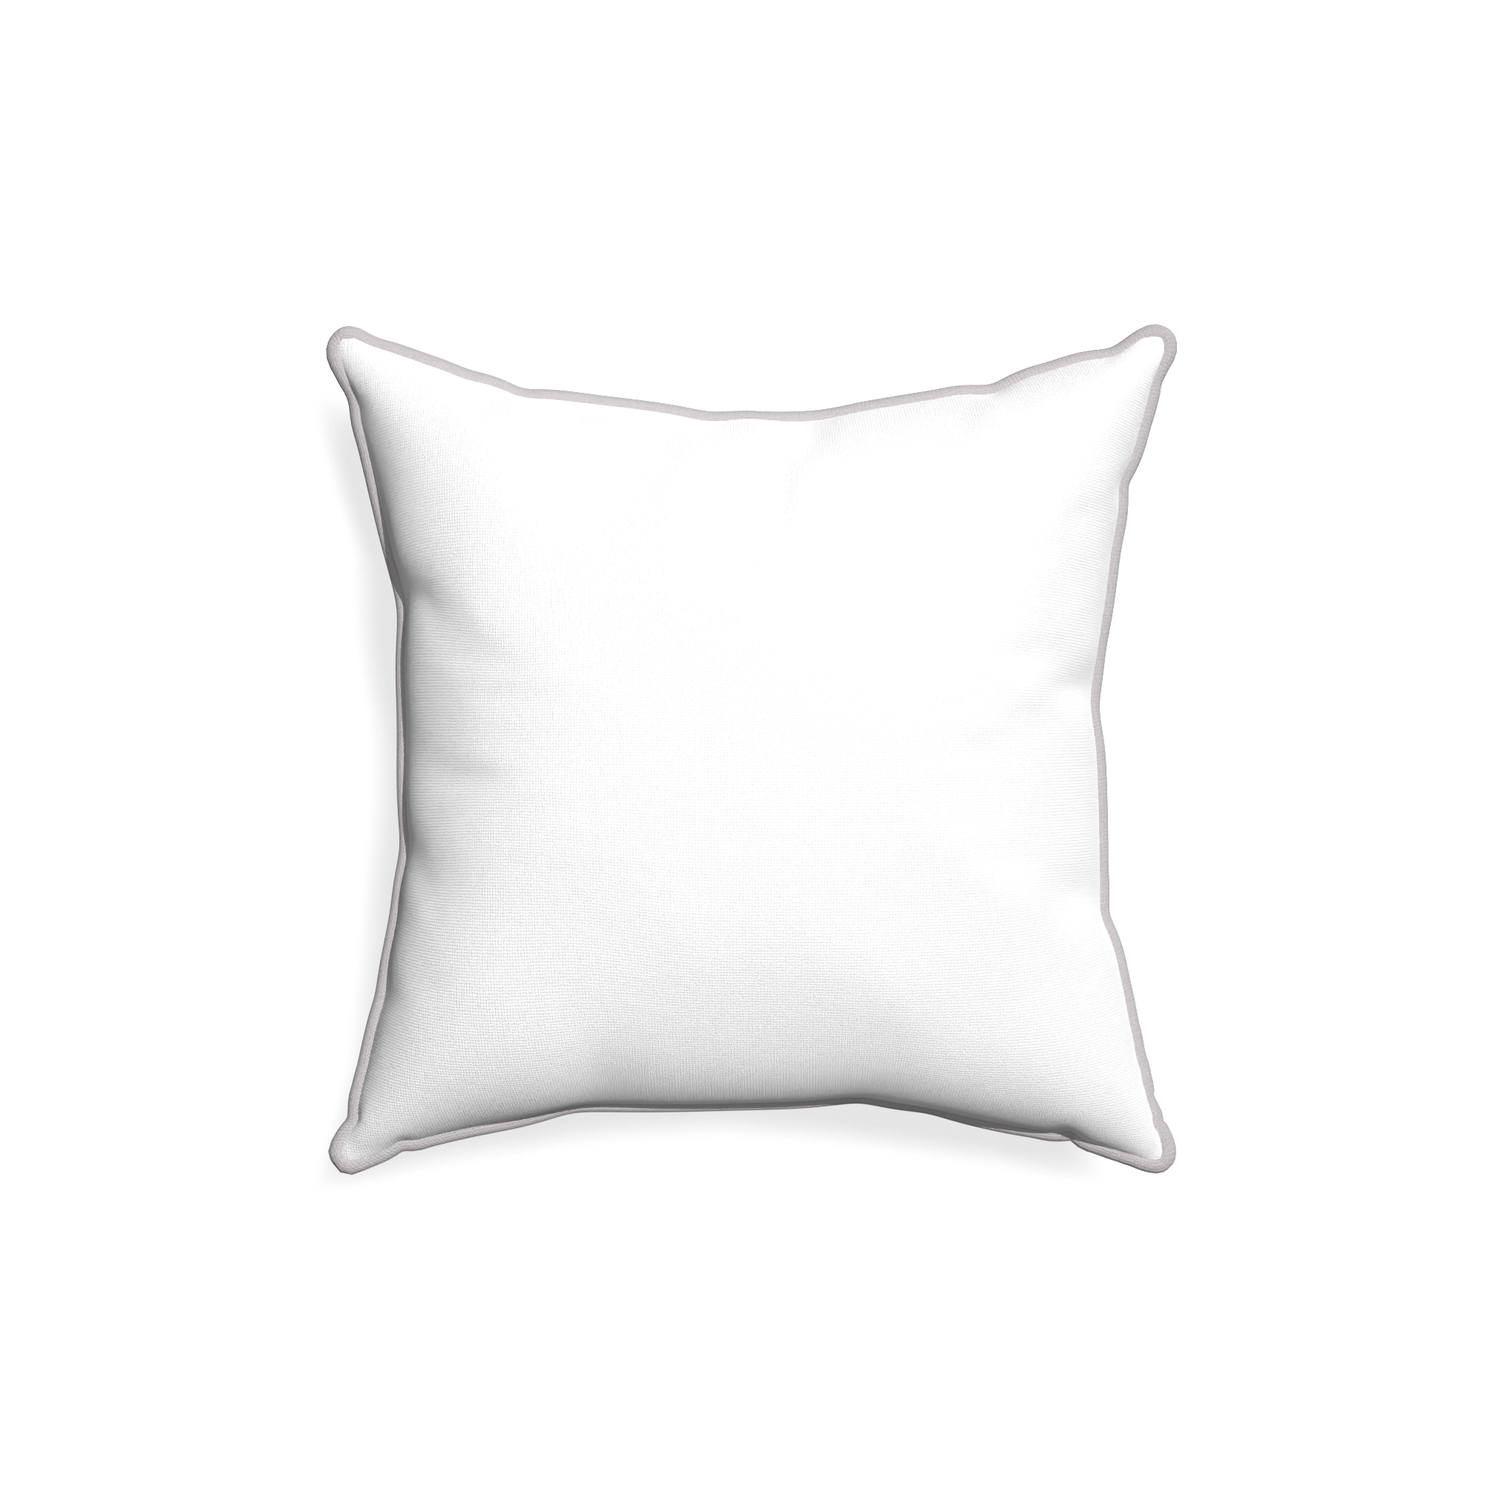 18-square snow custom white cottonpillow with pebble piping on white background